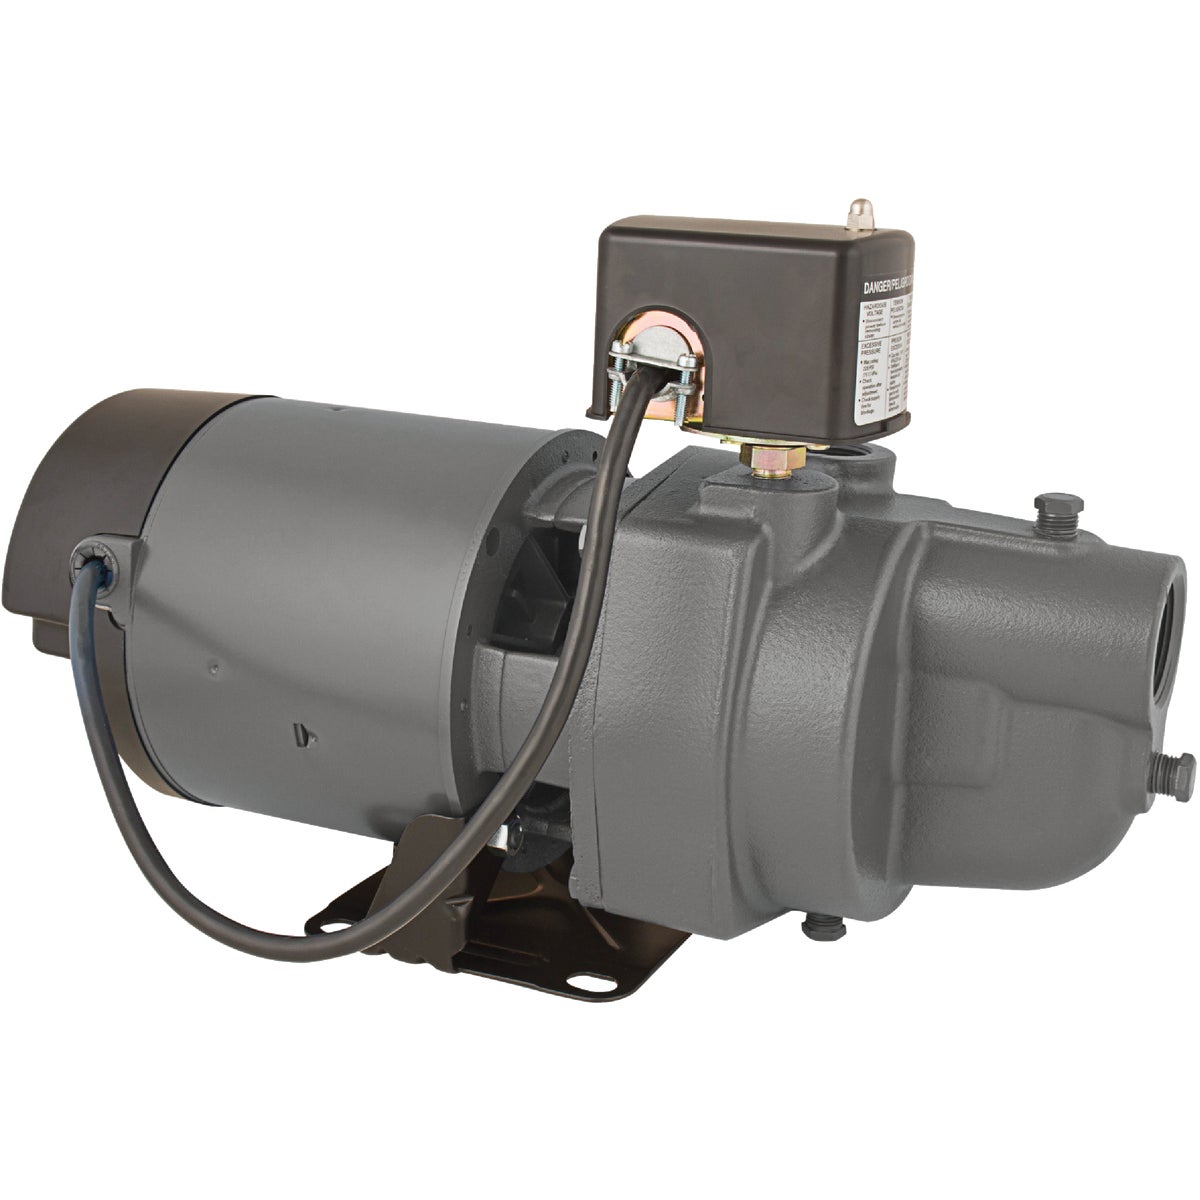 Item 416959, The ES jet pump is specifically designed for shallow well applications with